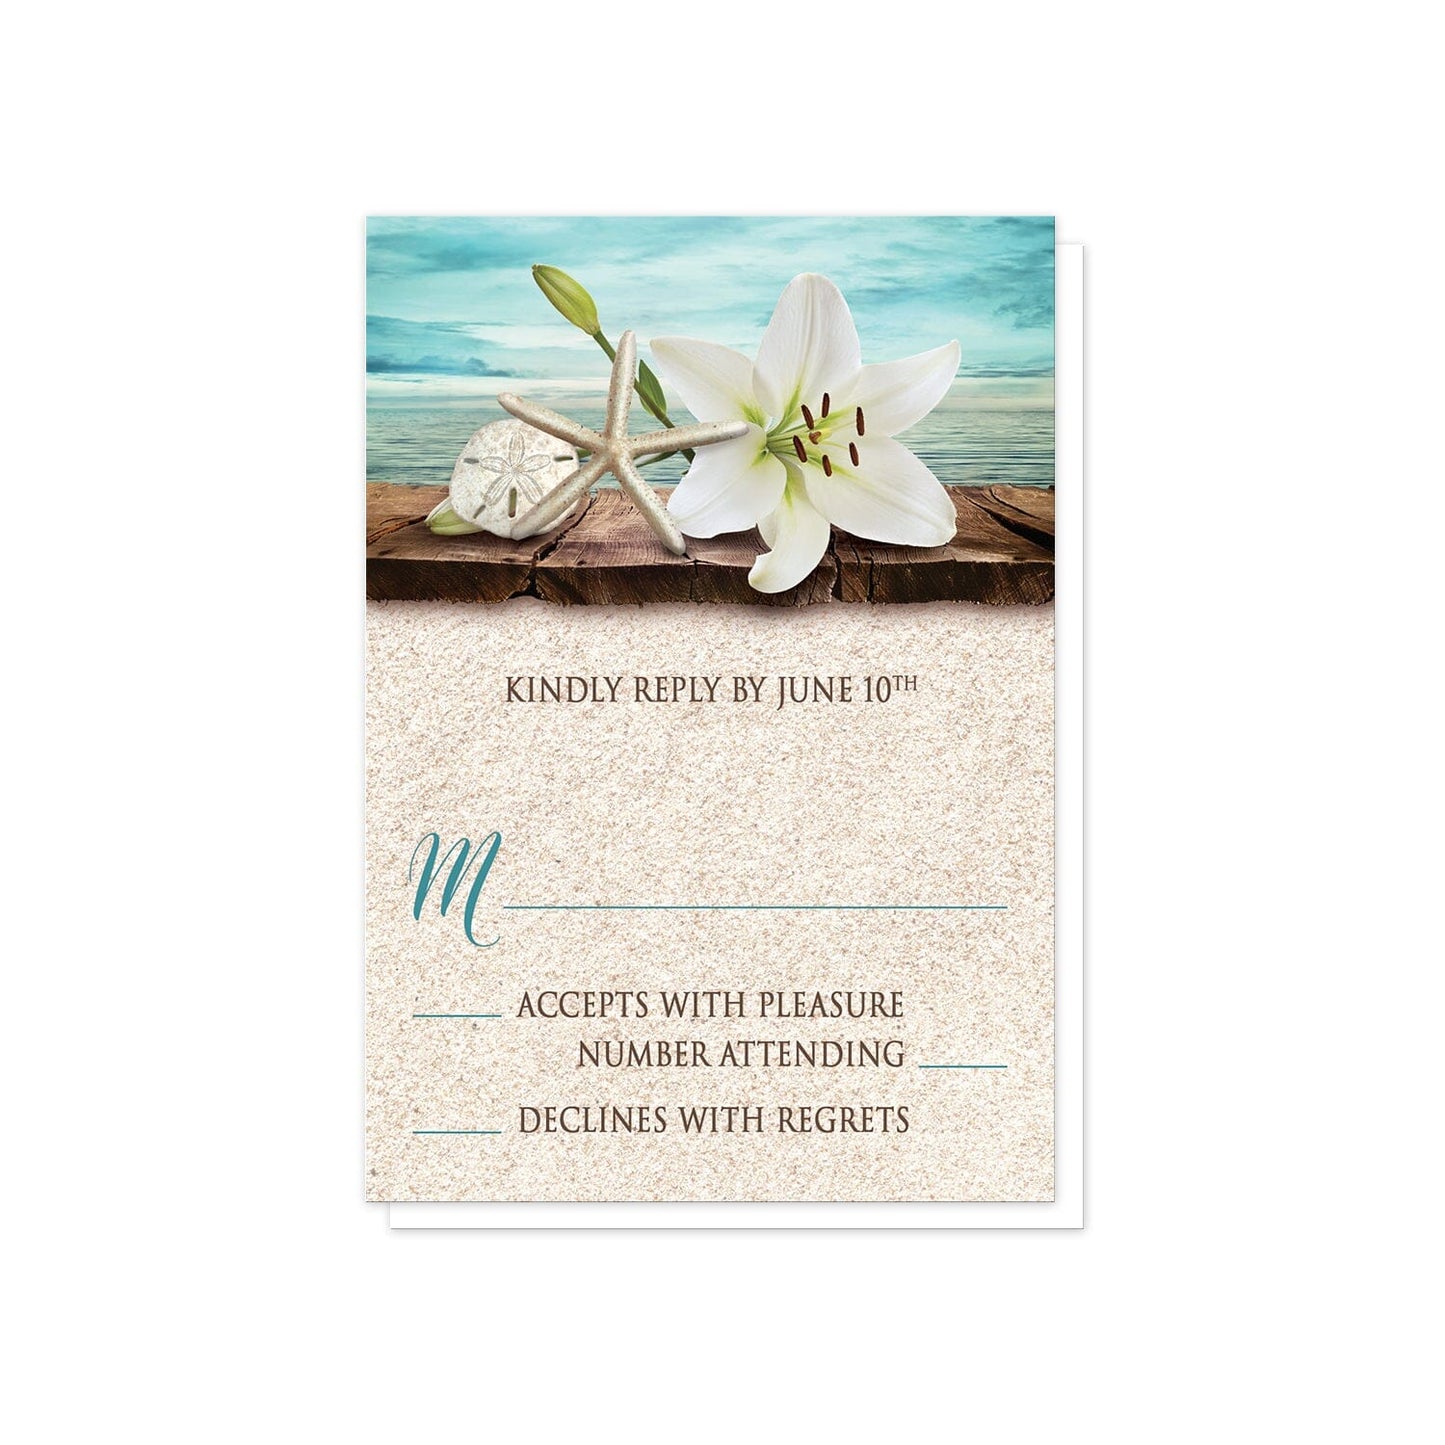 Lily Seashells and Sand Beach RSVP Cards (with rounded corners) at Artistically Invited.